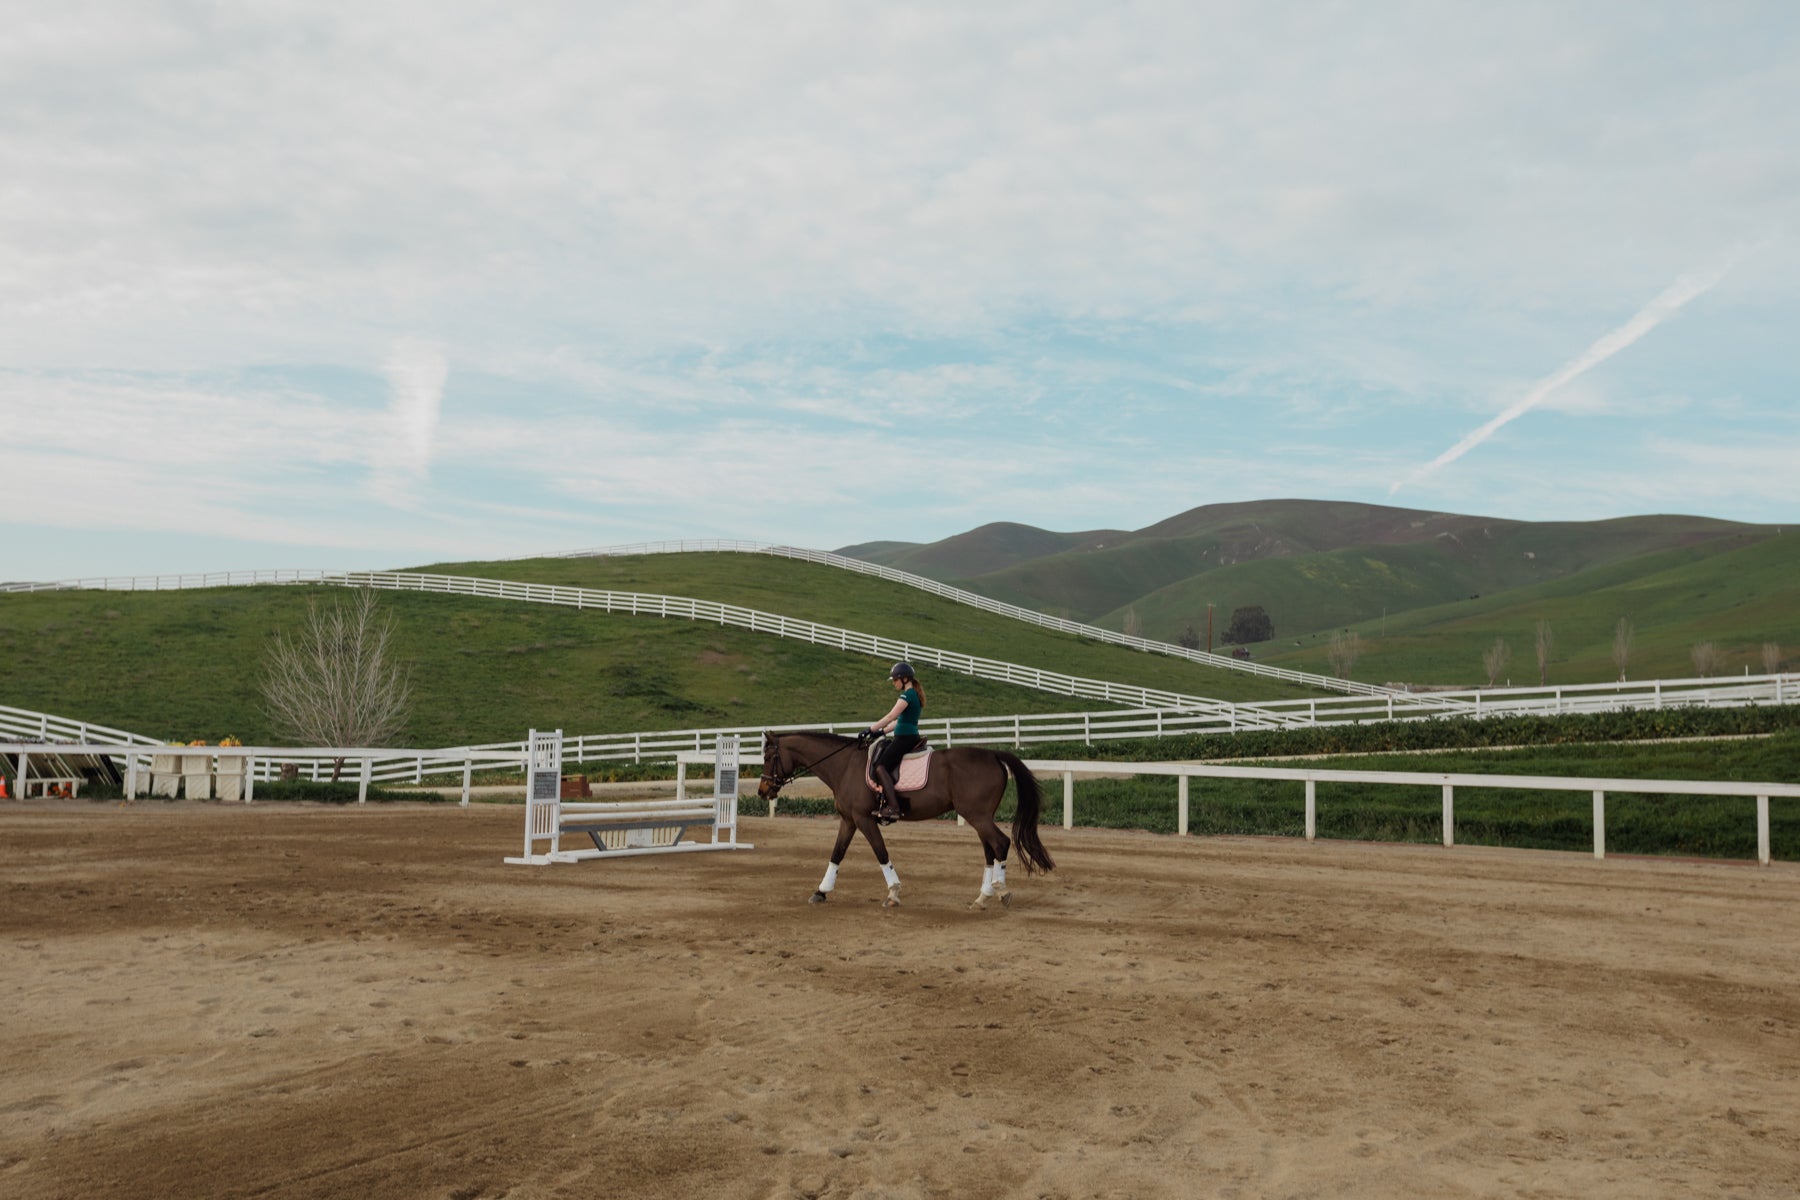 The best horseback riding lessons for kids and adults, dressage horse training + private stables in Livermore, CA. 